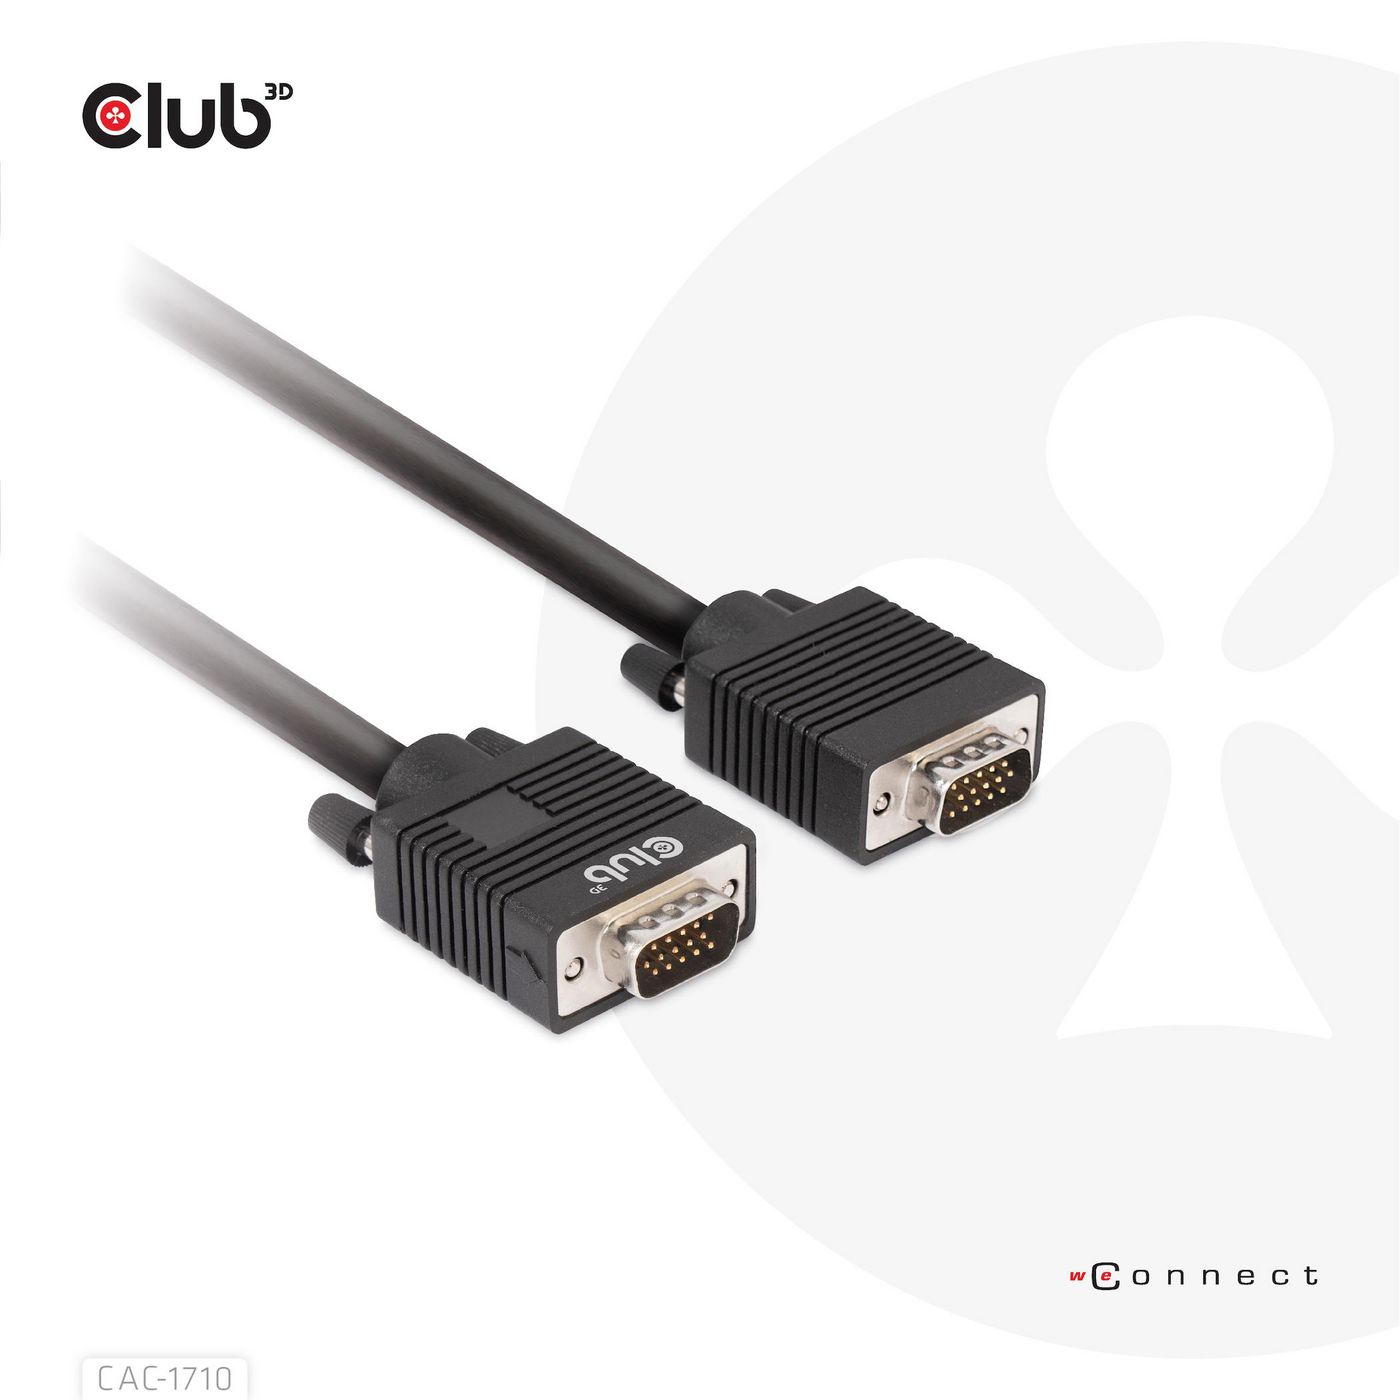 Club3D CAC-1710 W128561039 Vga Cable Bidirectional MM 